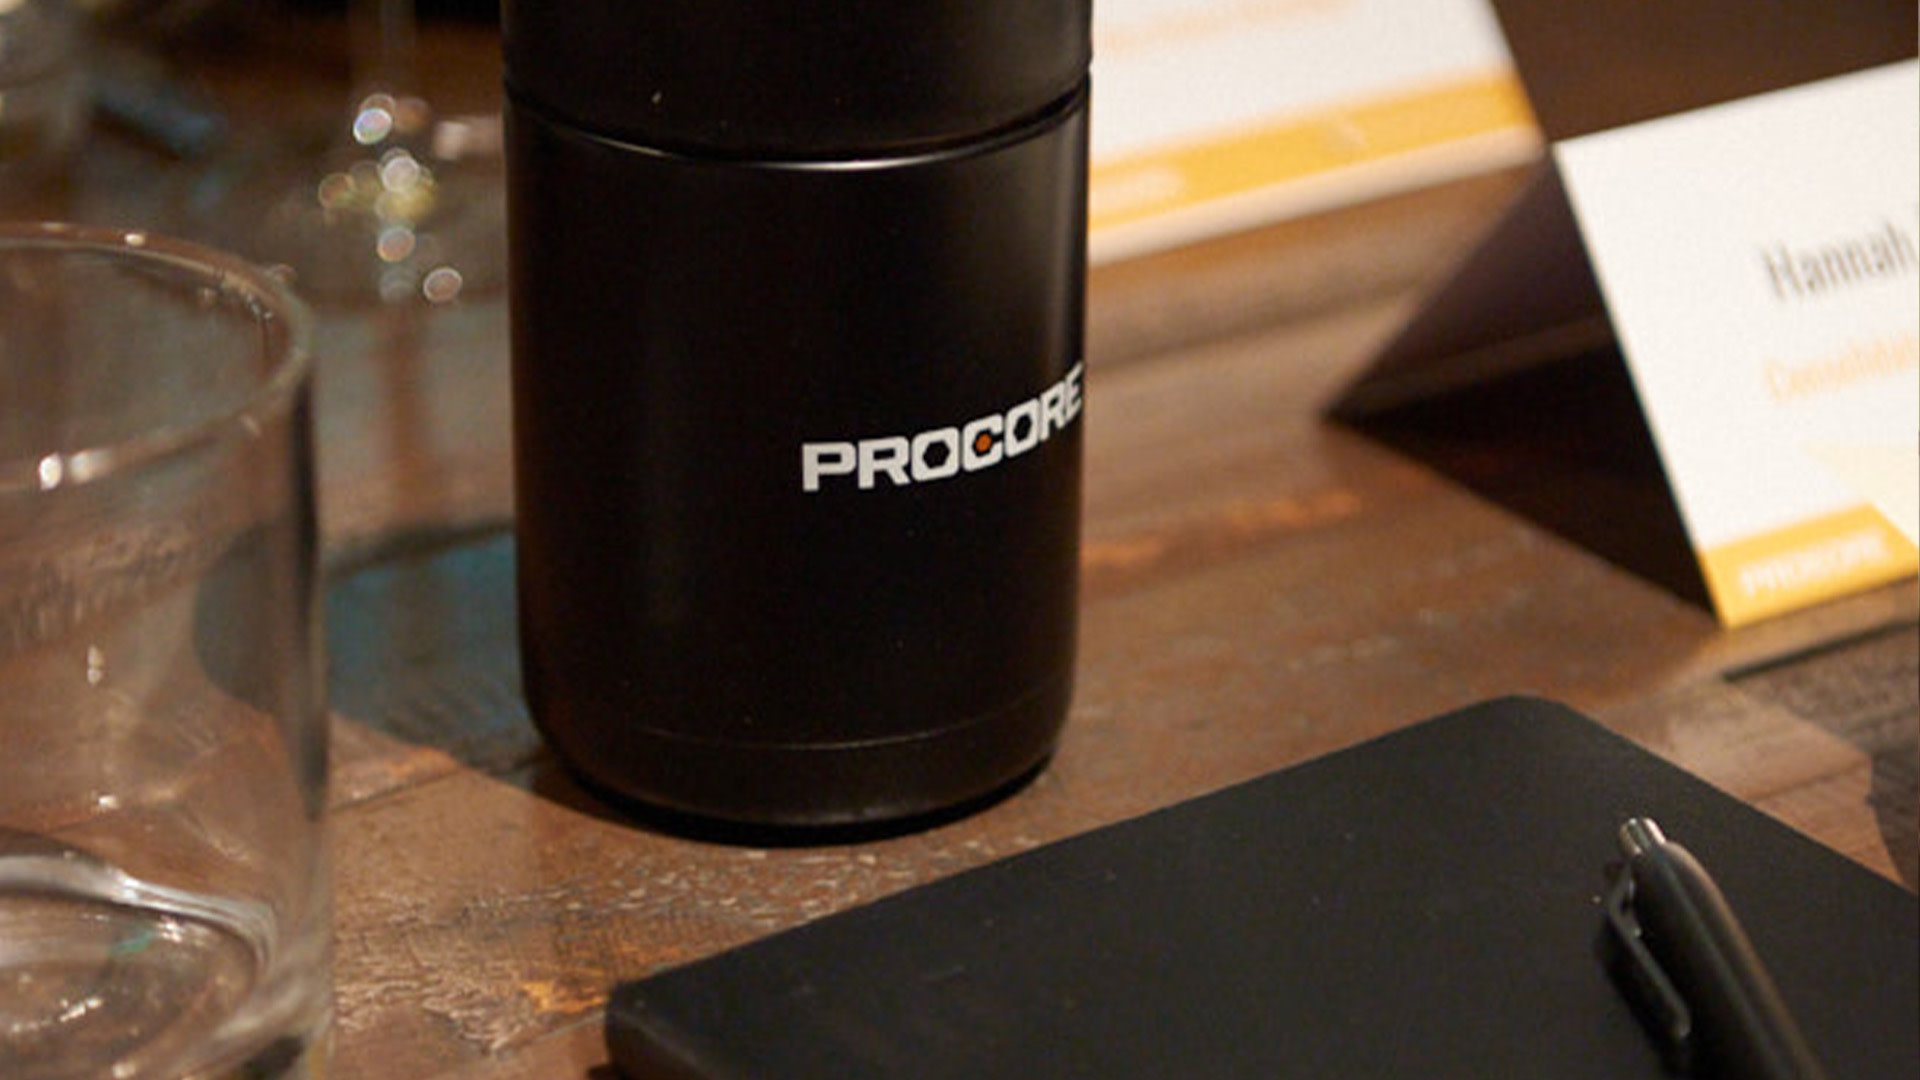 A notebook and a Procore water bottle on a table